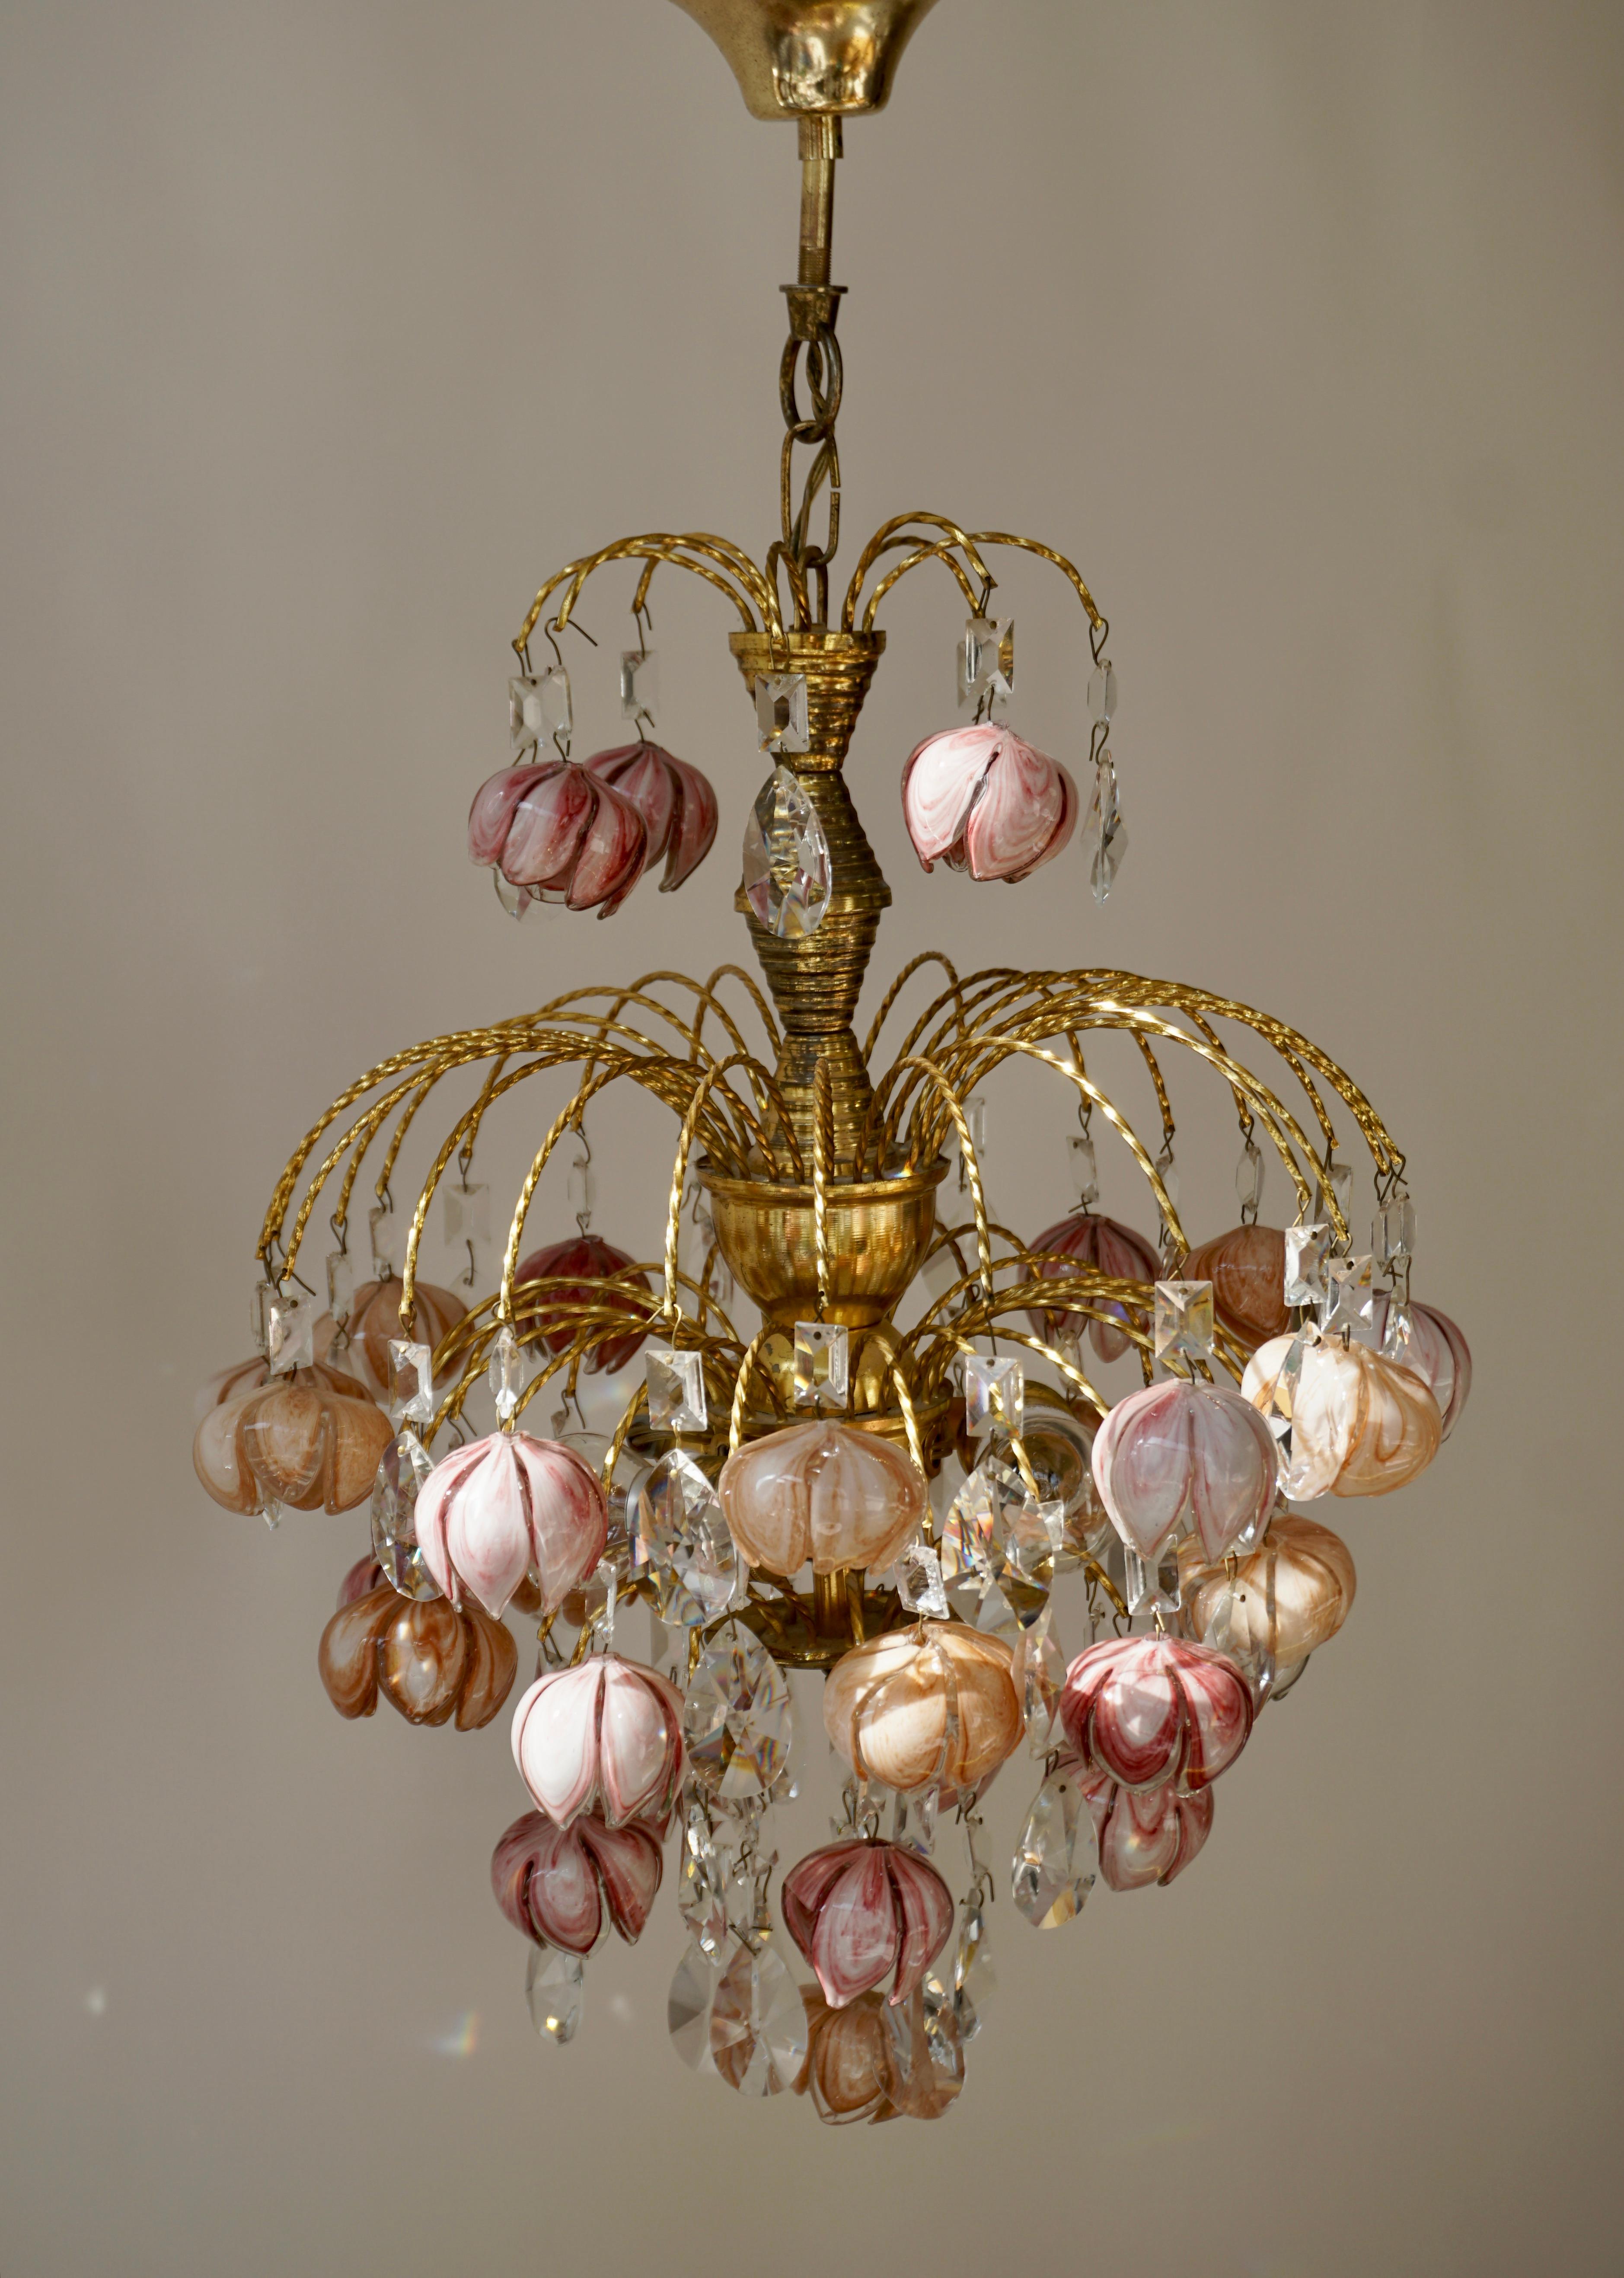 Two very beautiful and rare floral chandeliers in Murano glass designated and produced in Italy in the 1970s. Golden metal chandelier composed of pink and white flower-shaped glasses. Rare design object that will illuminate your interior